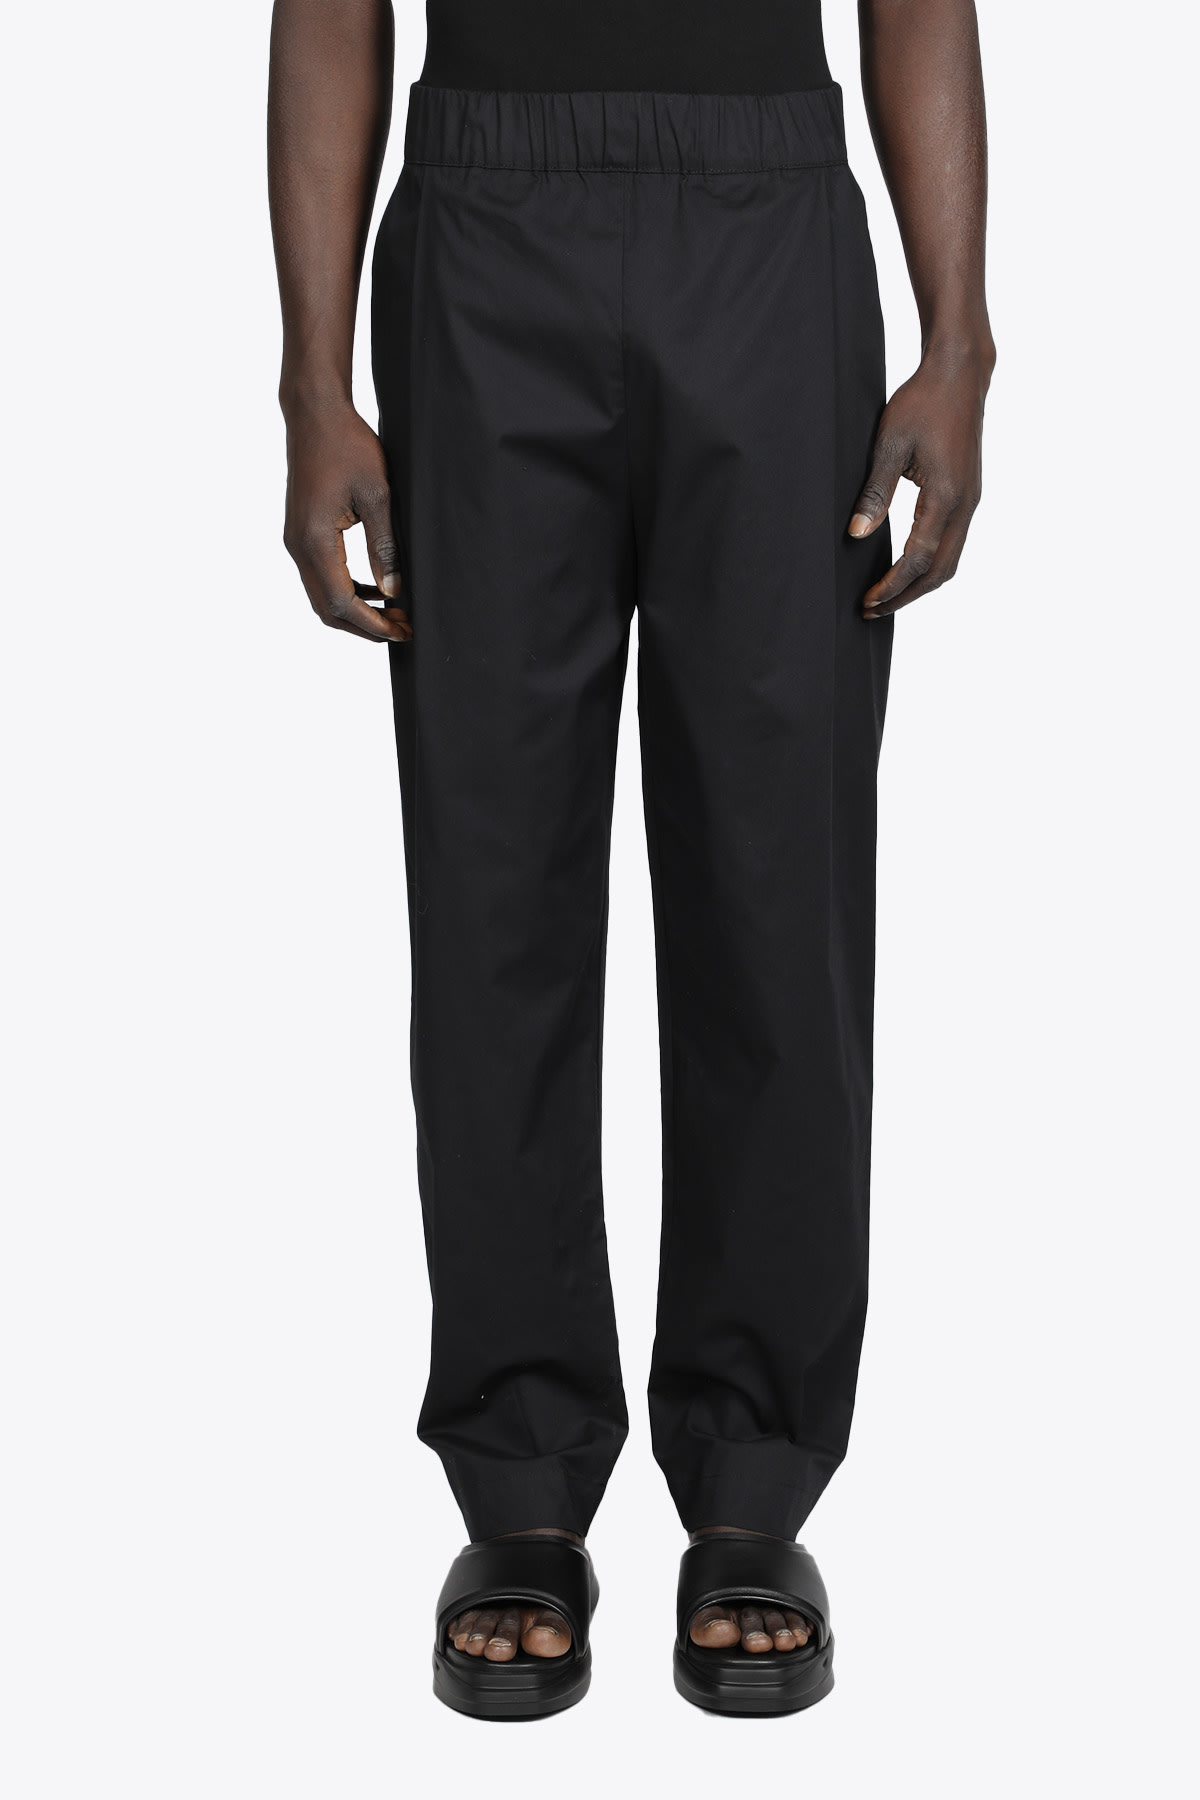 Laneus Baggy Unito Black poplin cotton trousers with front pleat